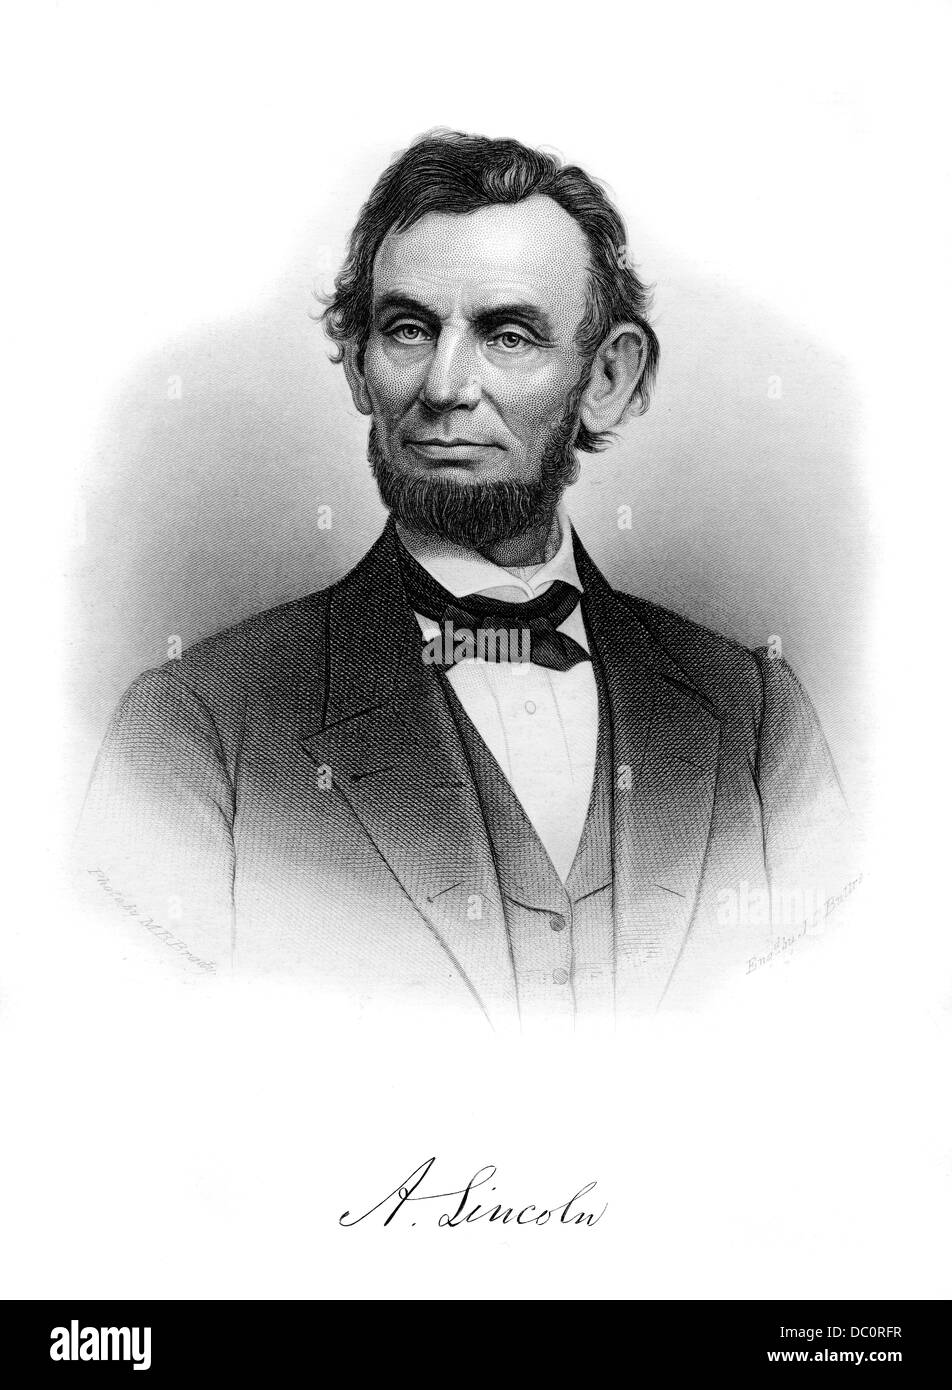 1800s 1860s 1862 PORTRAIT ABRAHAM LINCOLN 16TH  PRESIDENT OF THE UNITED STATES OF AMERICA Stock Photo